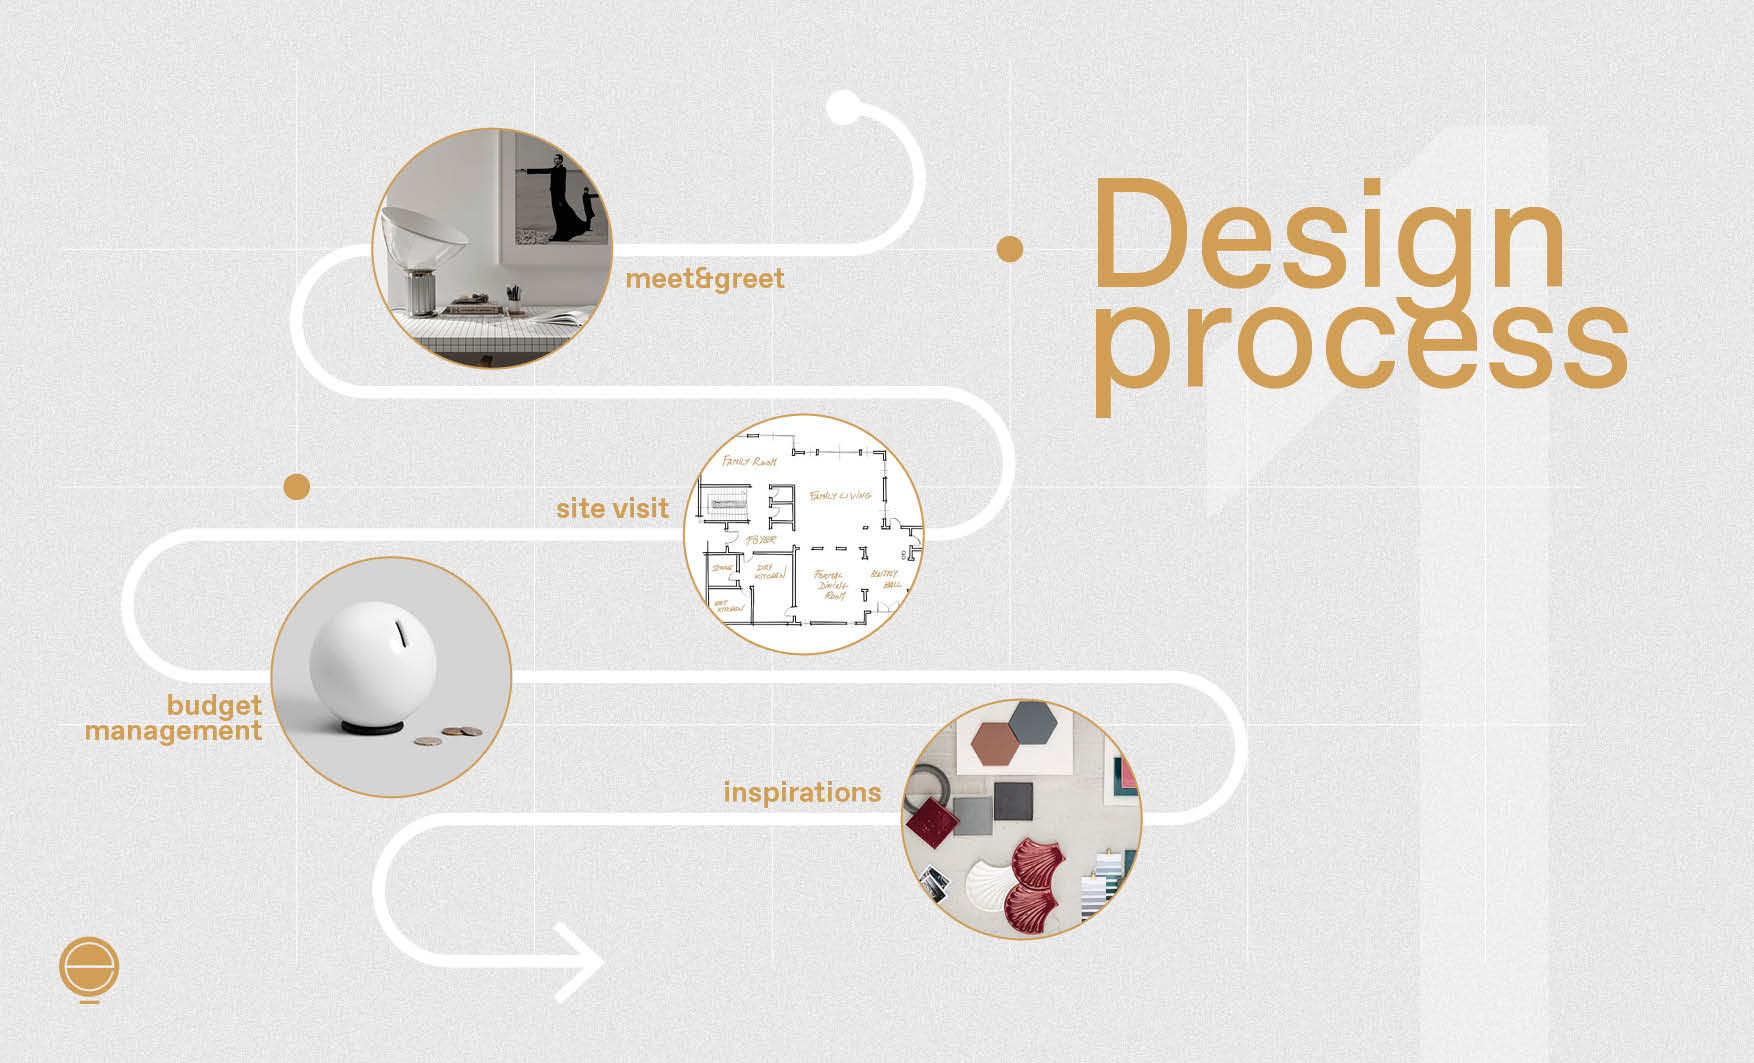 Start your journey discovering the interior design process steps in the first map